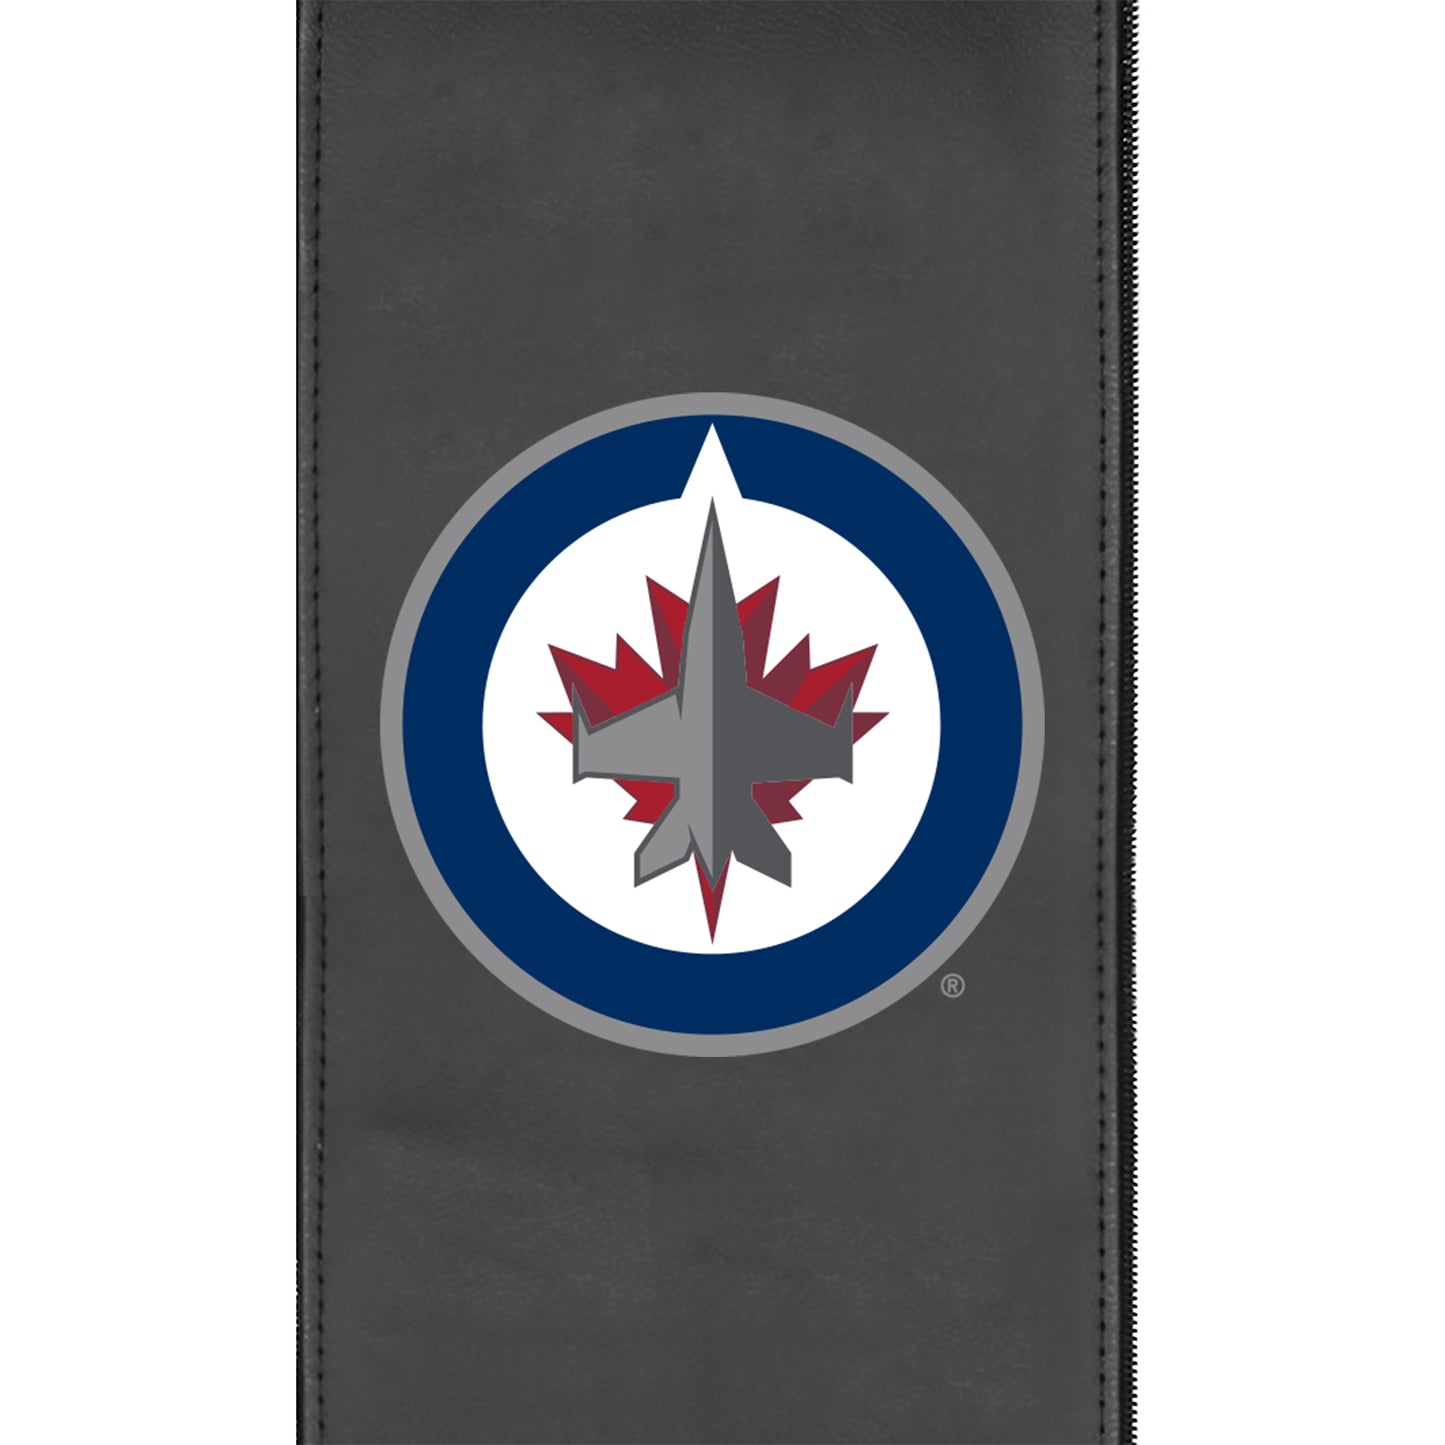 Xpression Pro Gaming Chair with Winnipeg Jets Logo